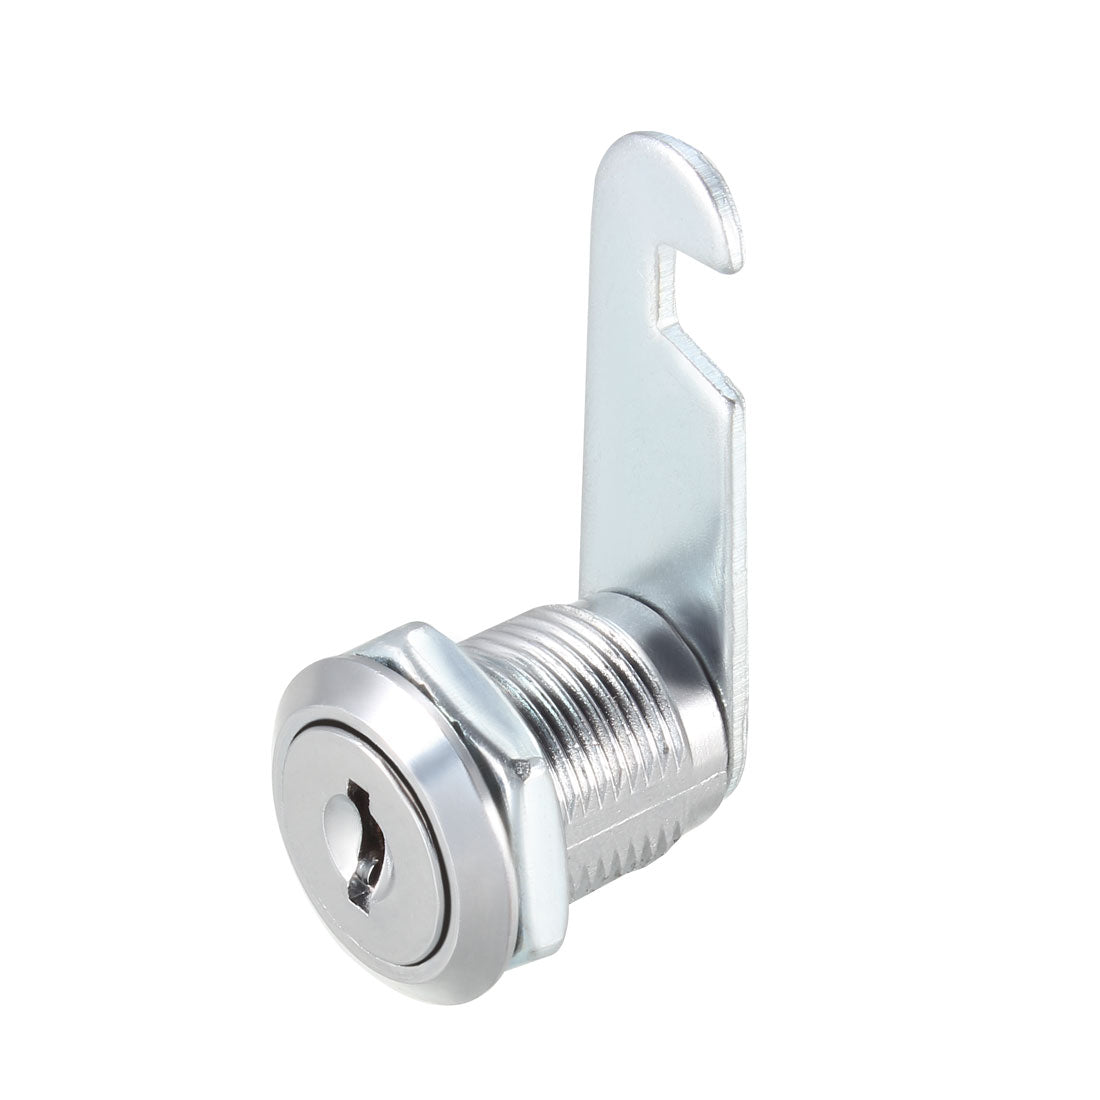 uxcell Uxcell Cam Locks 20mm Cylinder Length Fit Up to 1/2-inch Panel Keyed Different 2Pcs